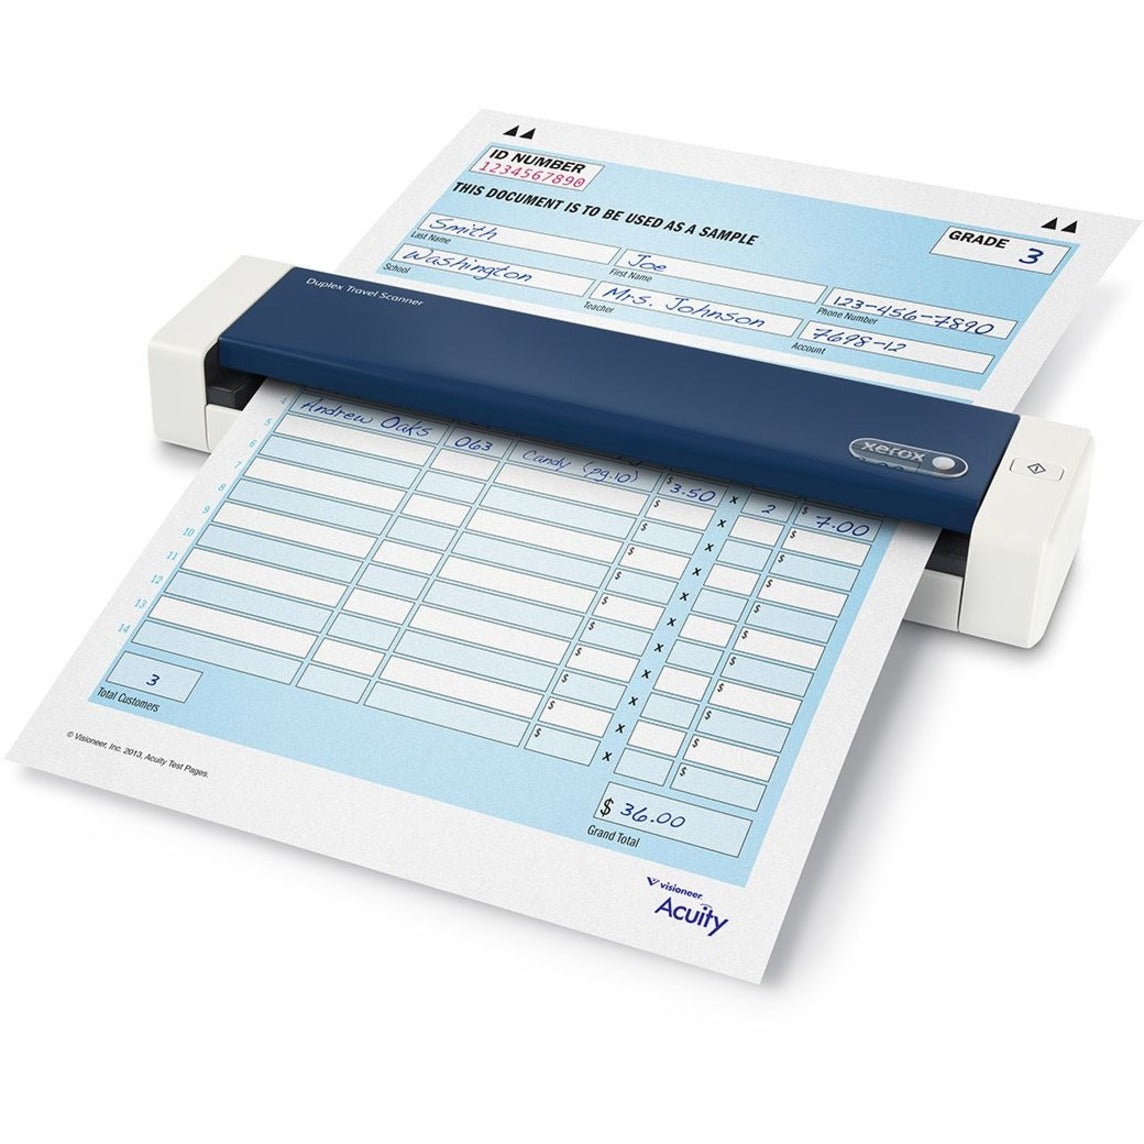 Xerox XTS-D Duplex Travel Scanner - Portable Sheetfed Scanner, 600 dpi Optical